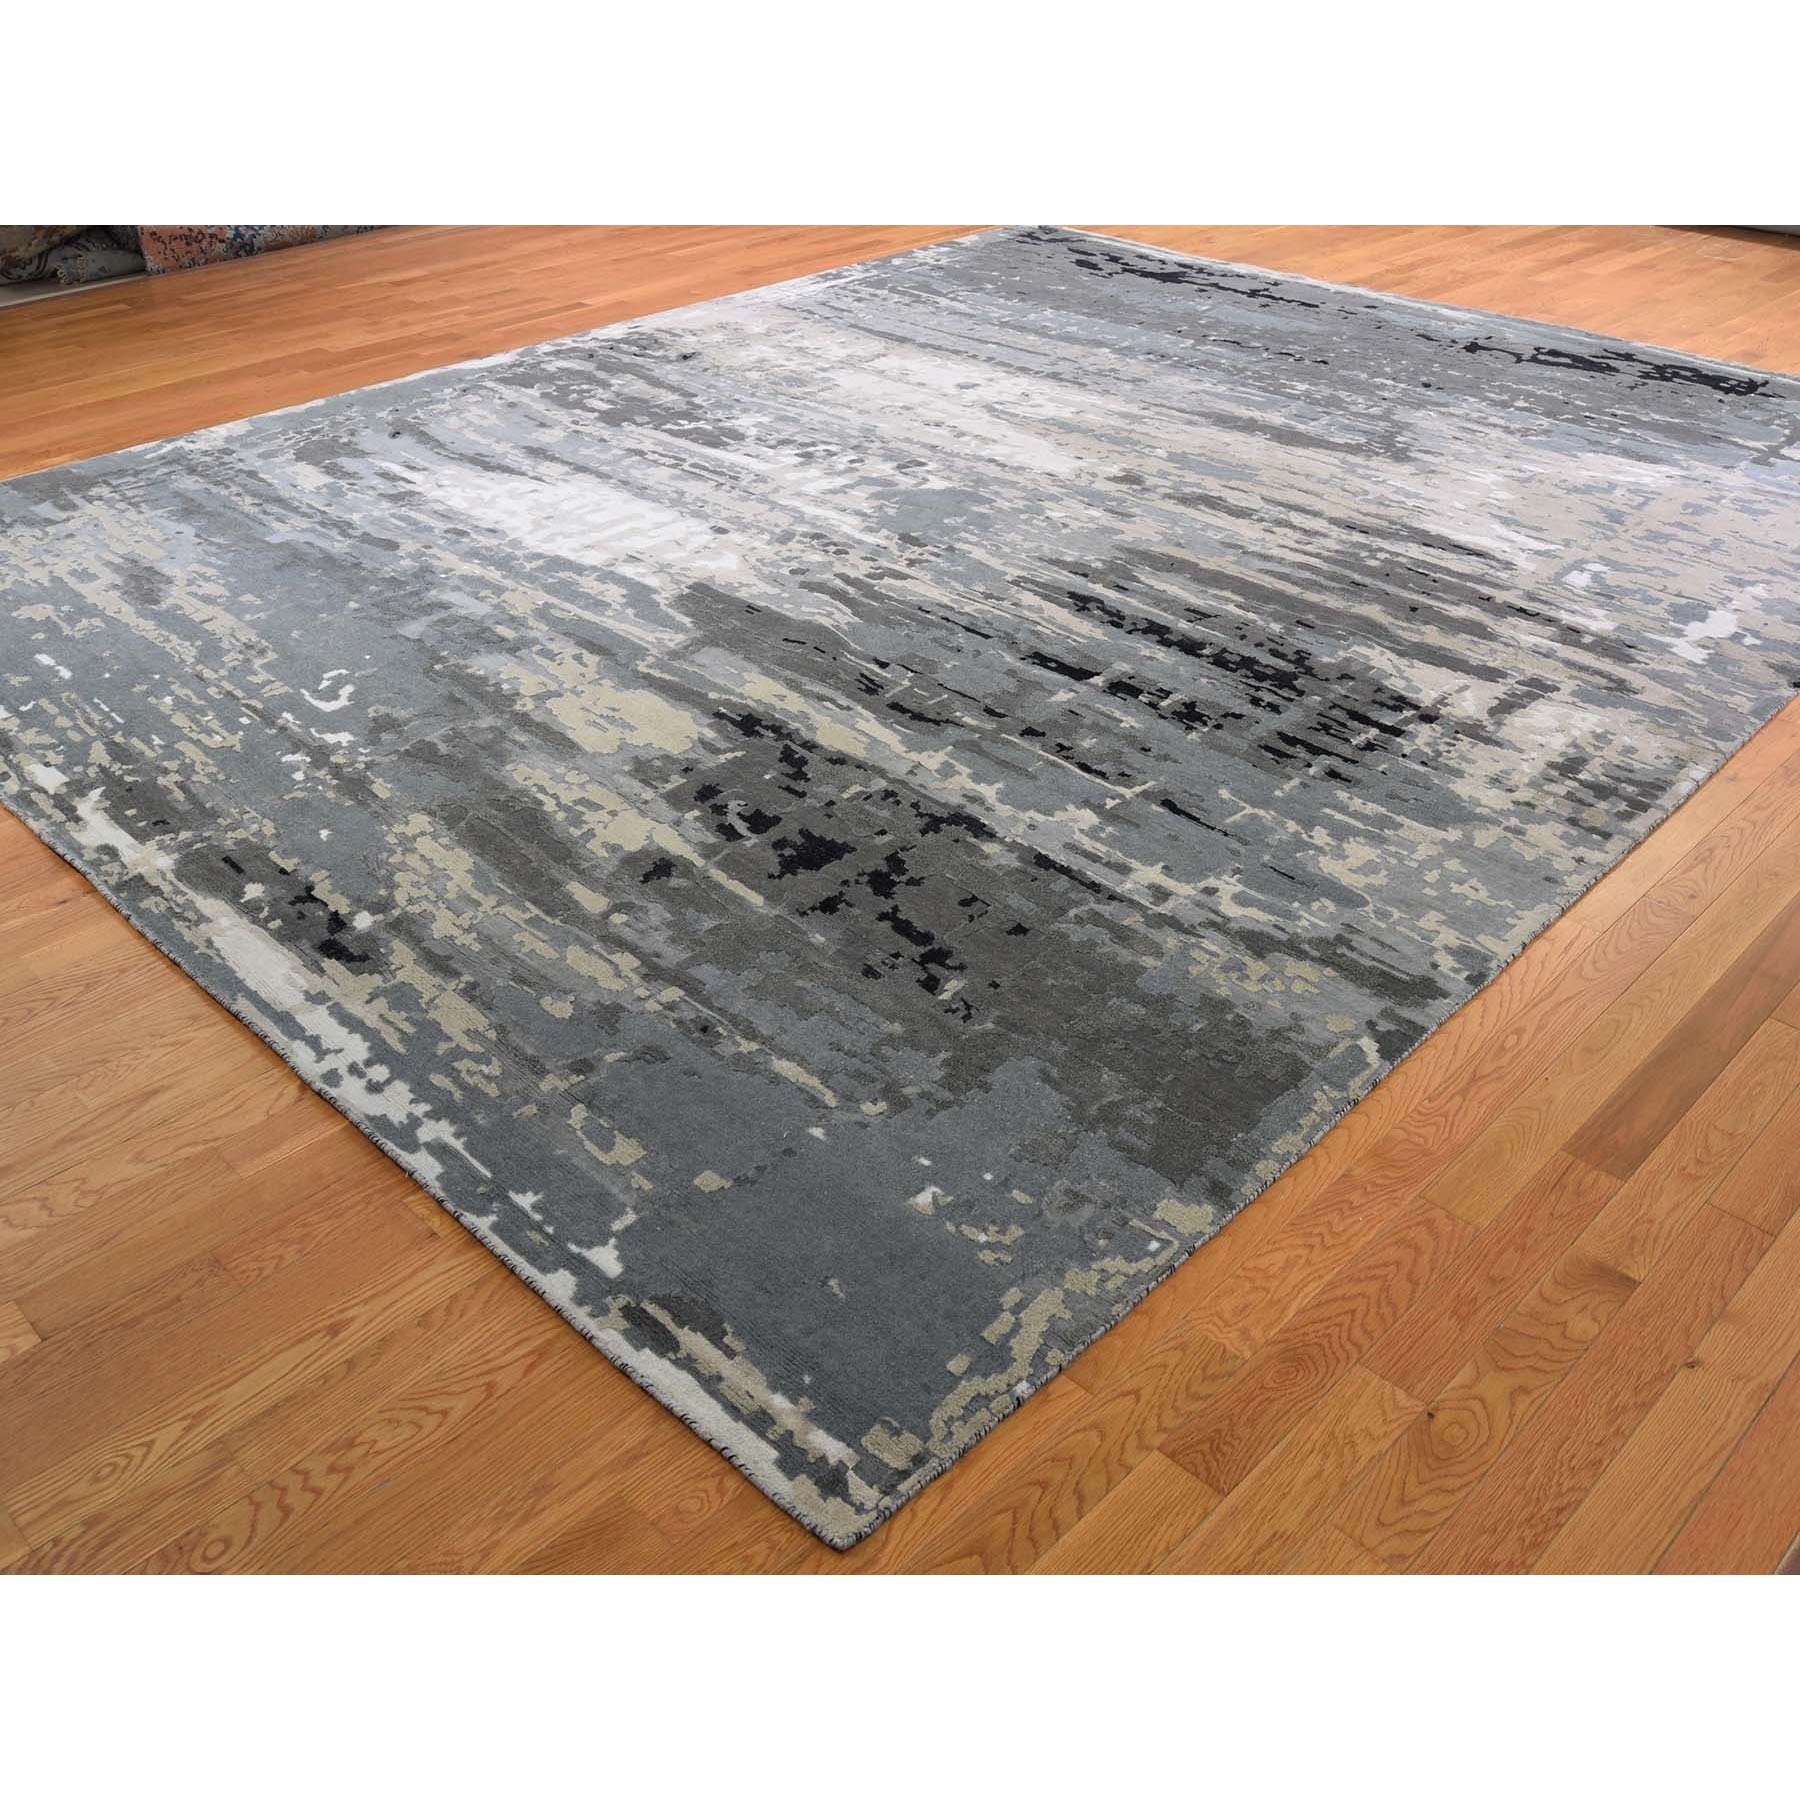 12-x15- Oversize Hi-Lo Pile Abstract Design Wool And Silk Hand Knotted Oriental Rug 